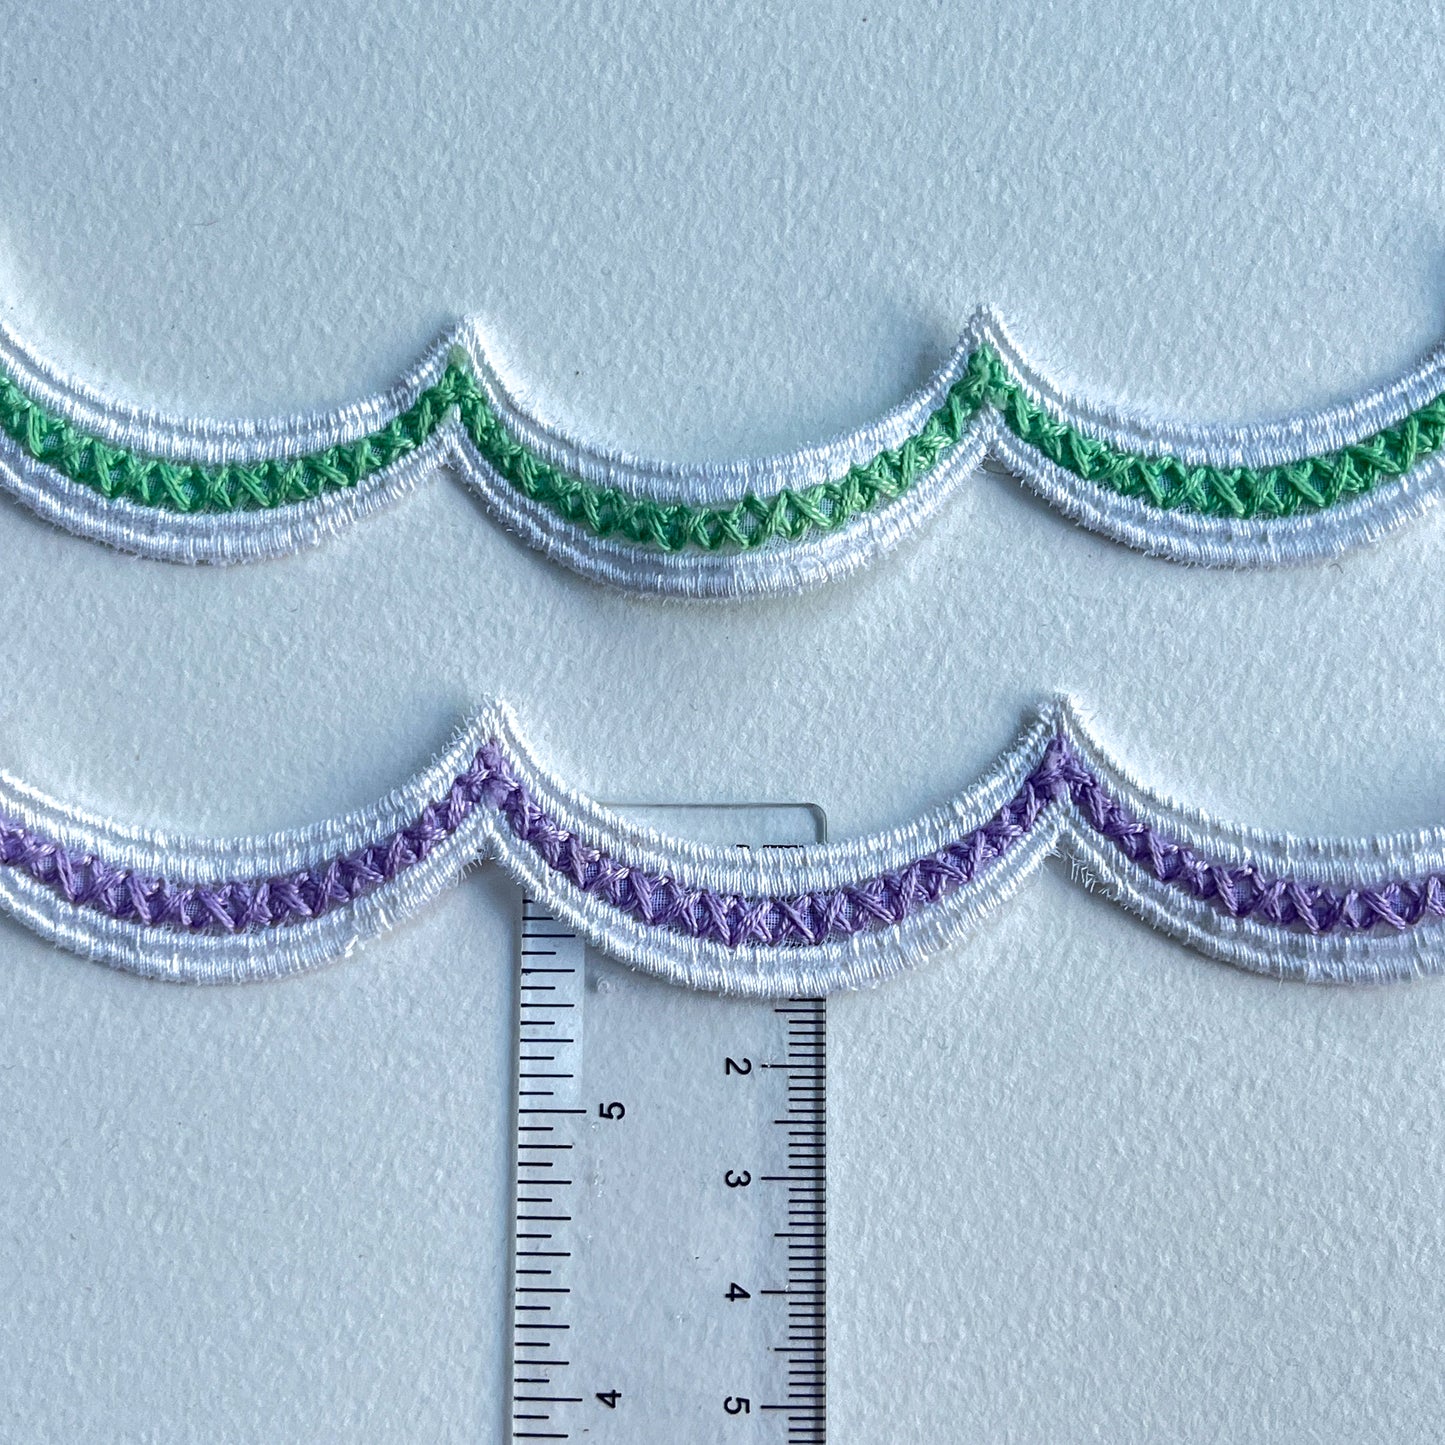 Very pretty 2 toned scalloped guipure lace edging trim available in two pastel colours - minty green or lovely lilac!